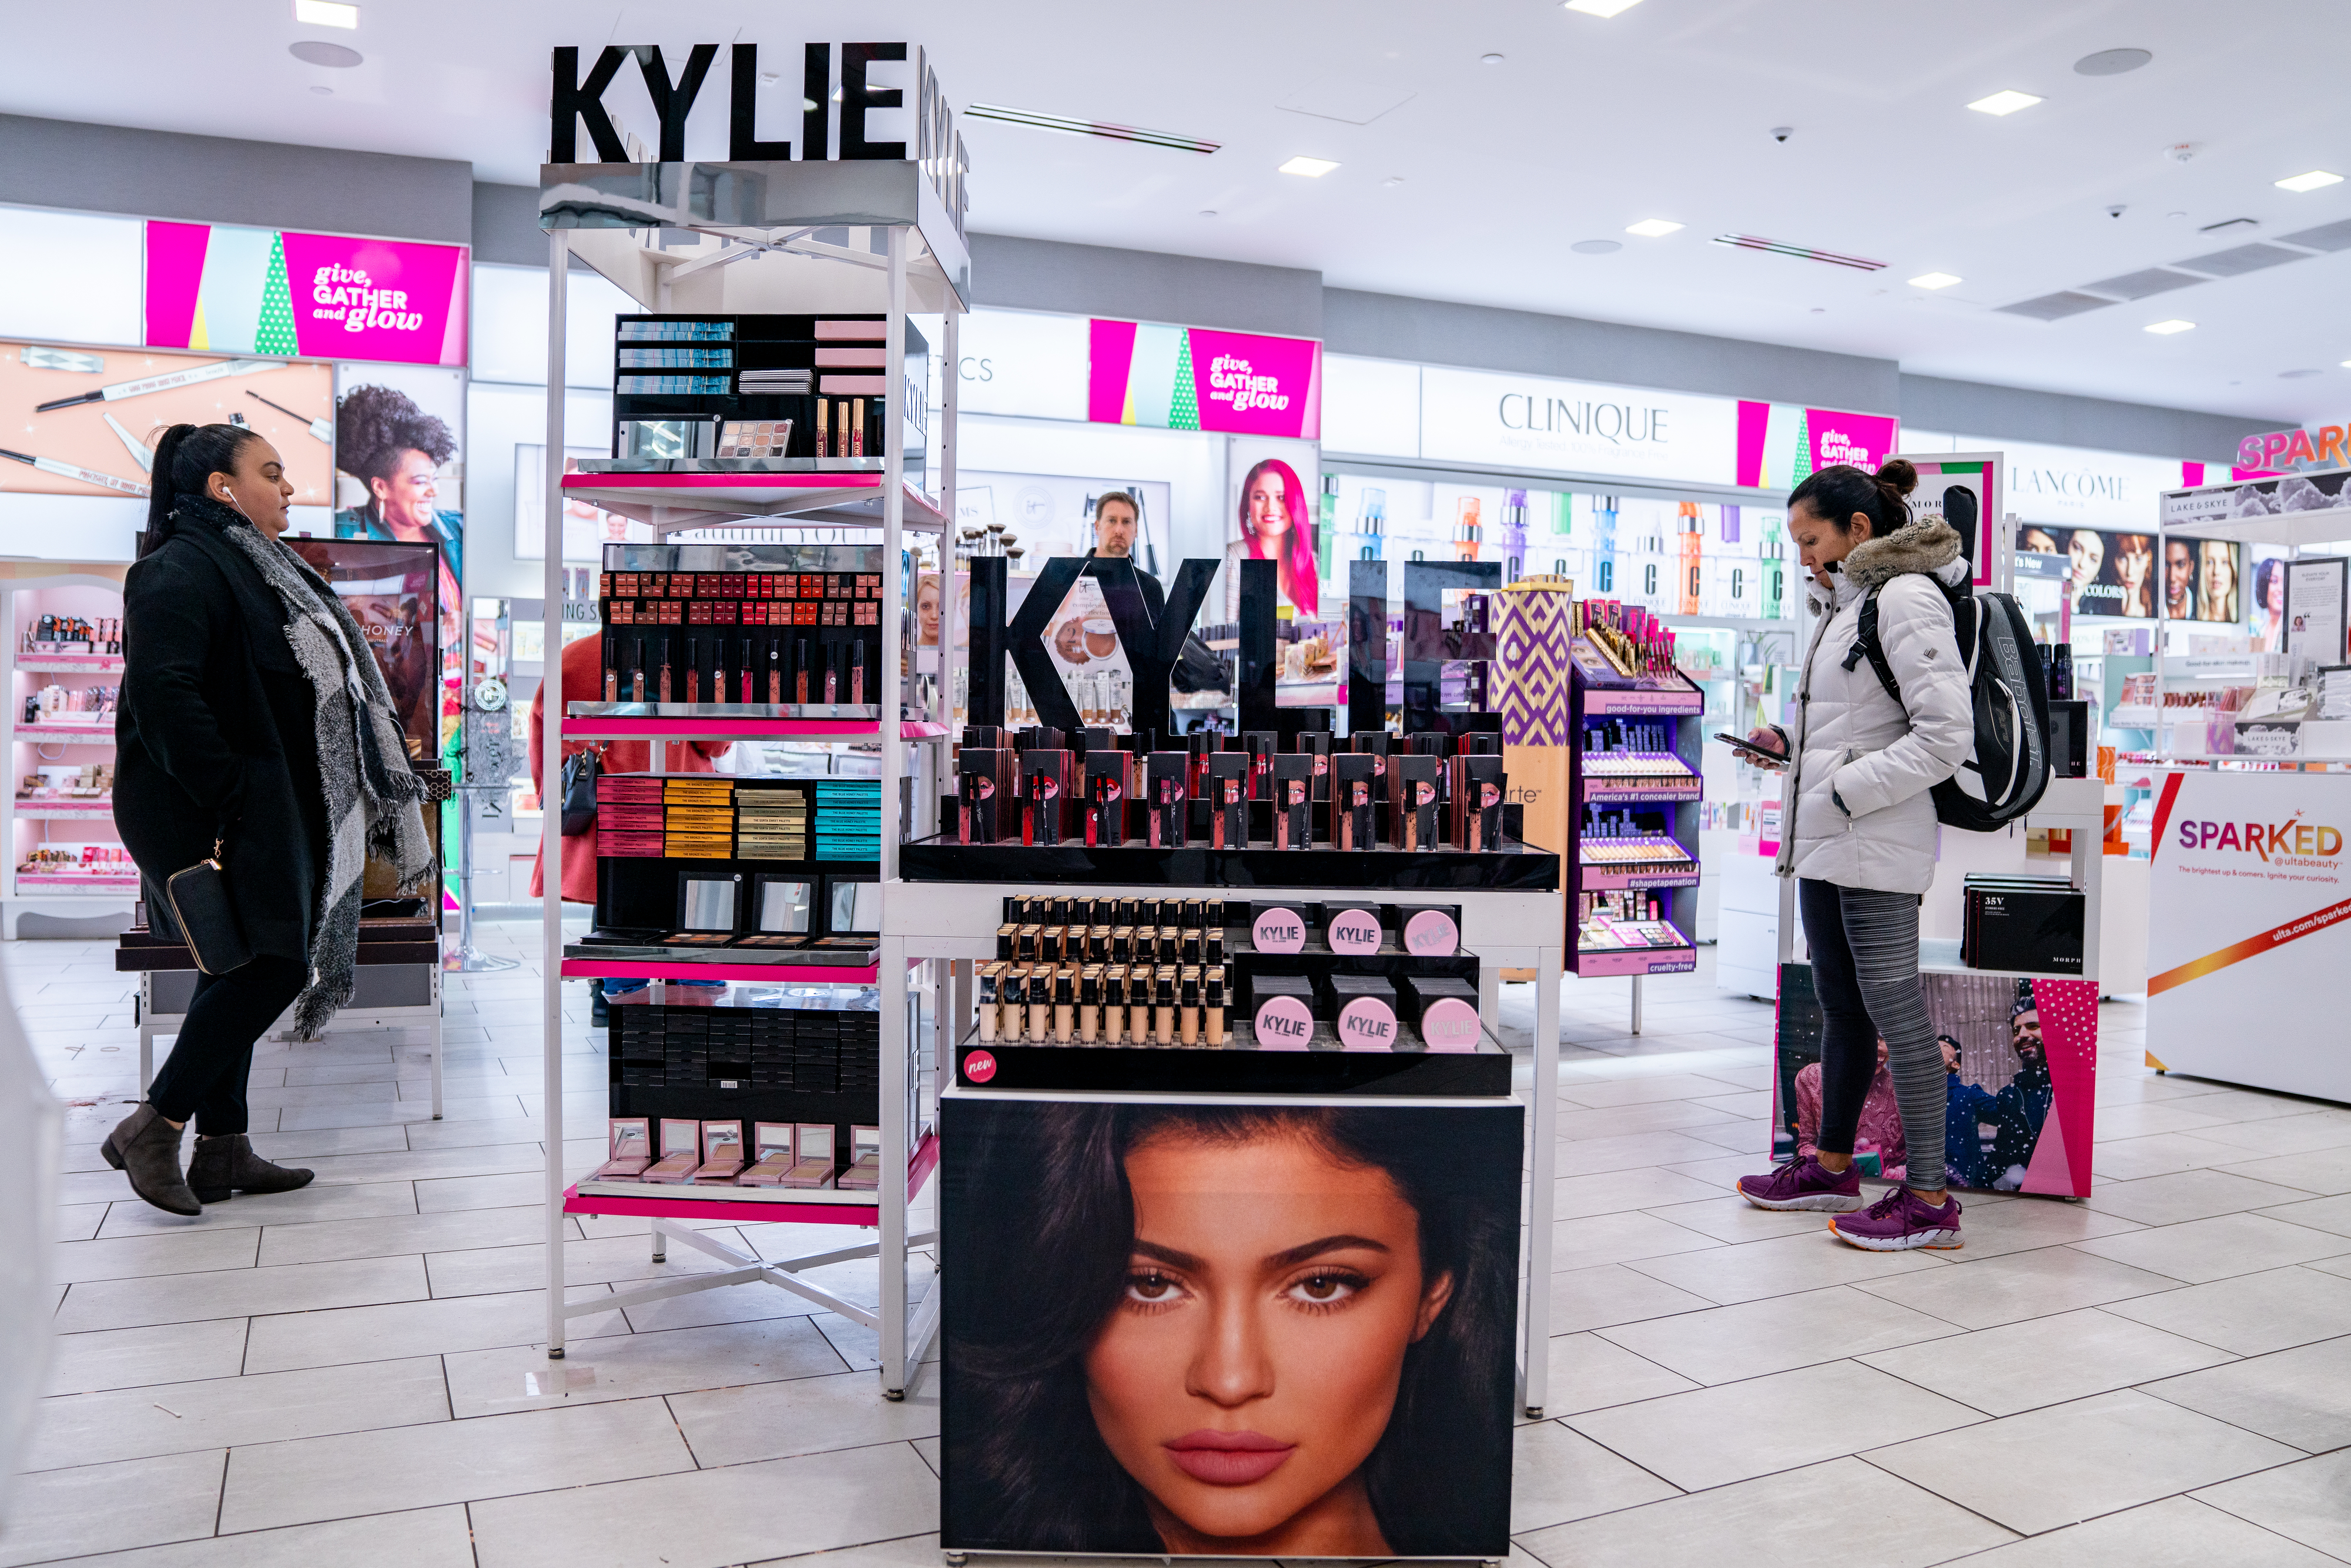 A Kylie display in a store